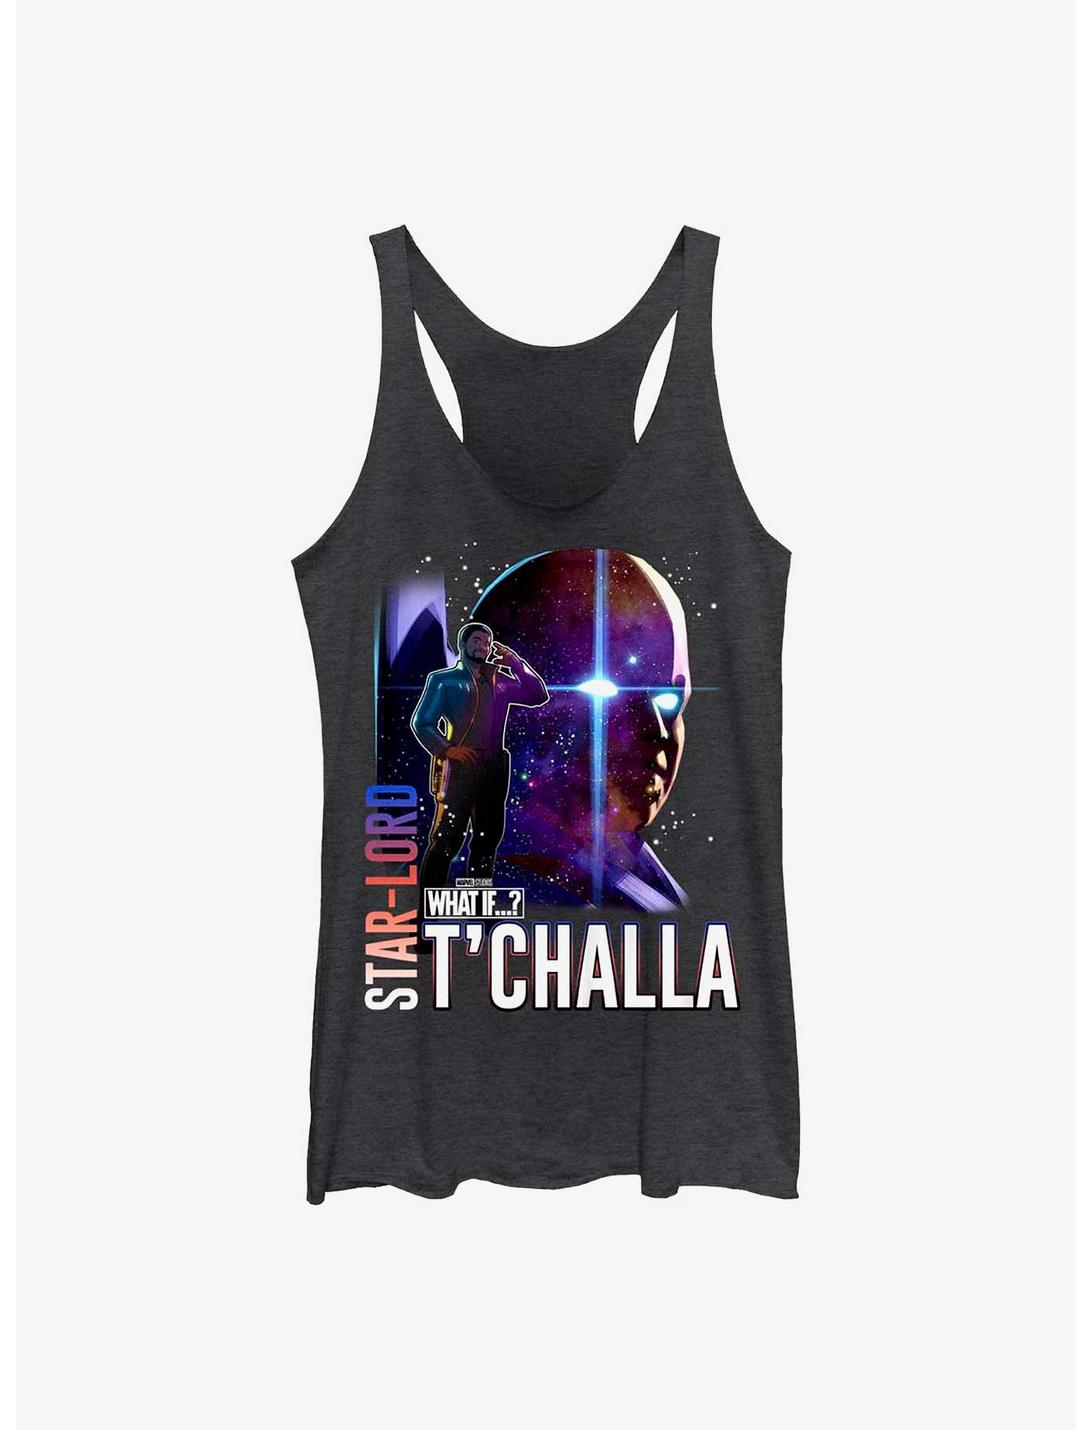 Marvel What If...? Watcher T'Challa Womens Tank Top, BLK HTR, hi-res